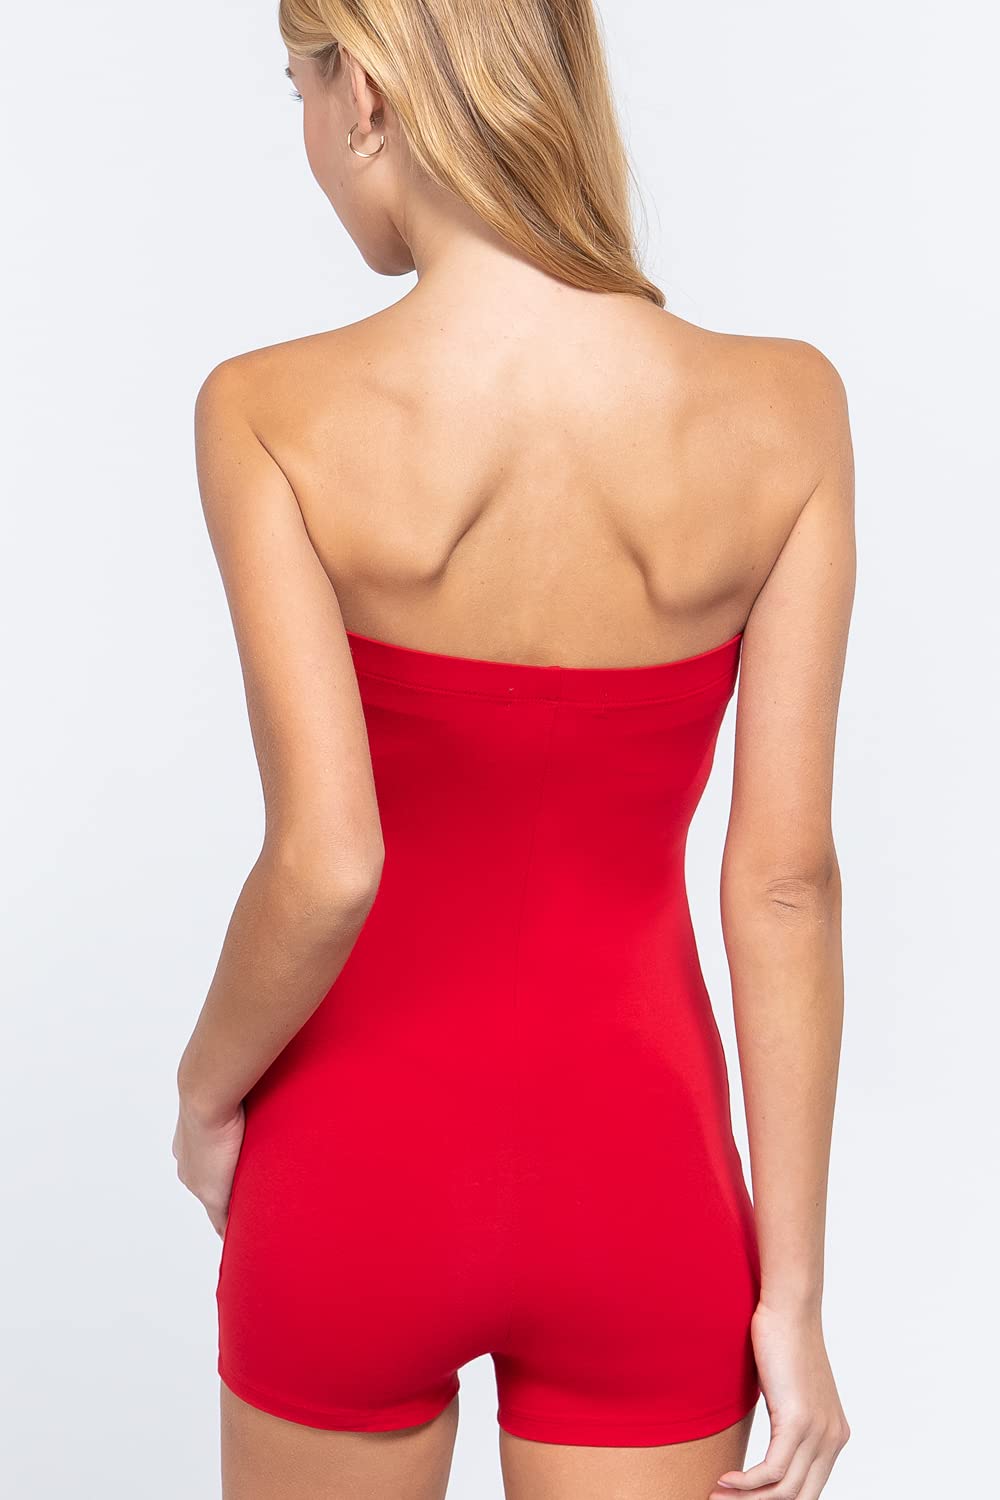 Multi-size Tube Top Strapless One-piece Sexy Jumpsuit, Women